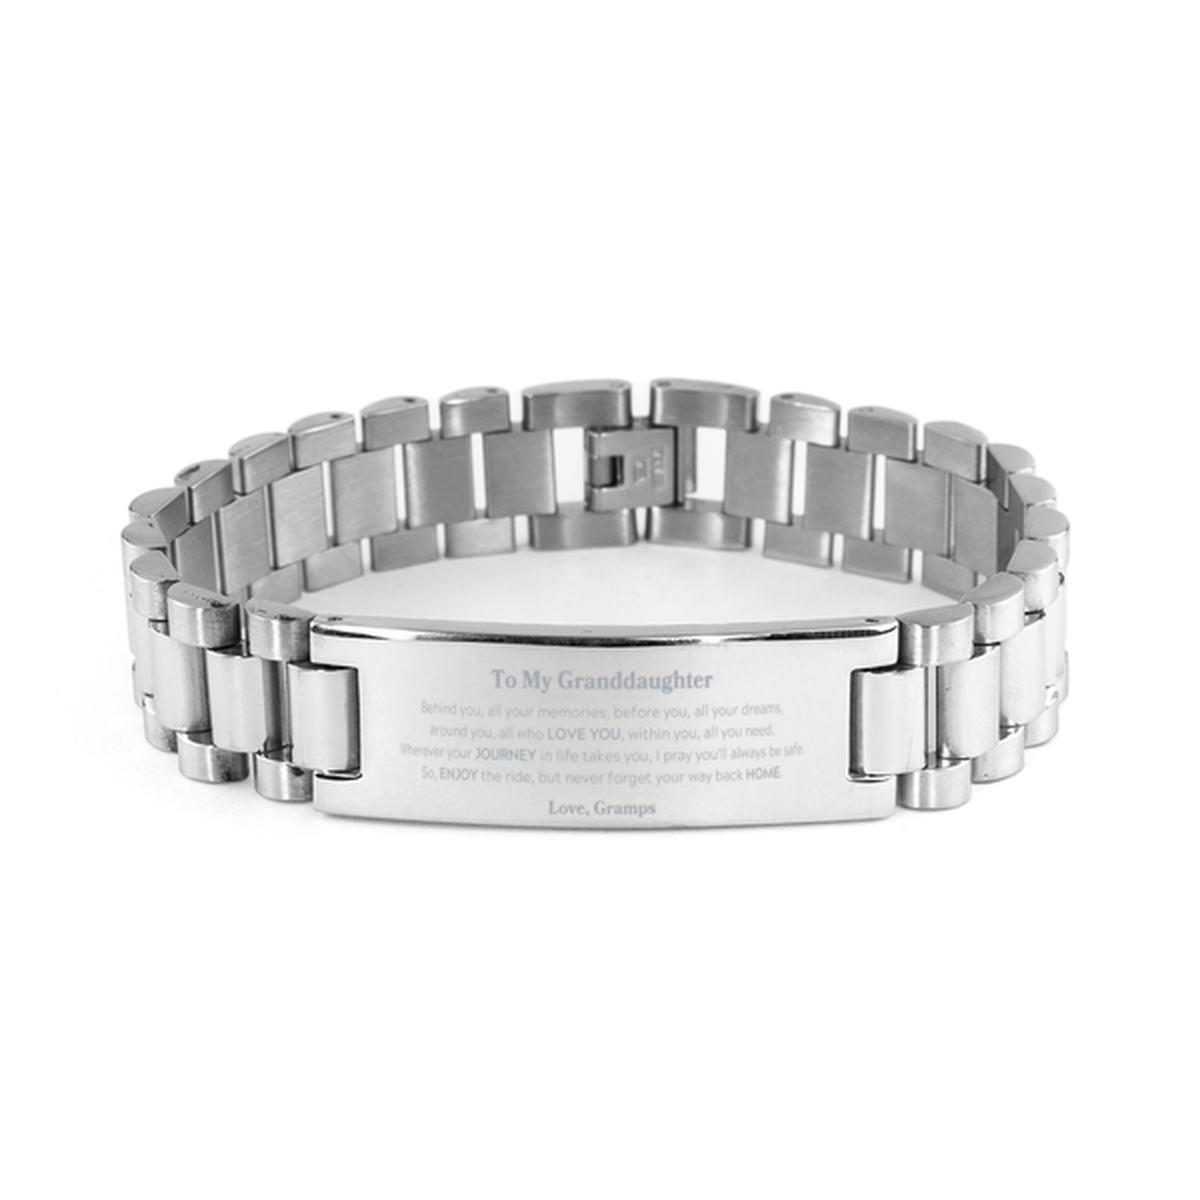 To My Granddaughter Graduation Gifts from Gramps, Granddaughter Ladder Stainless Steel Bracelet Christmas Birthday Gifts for Granddaughter Behind you, all your memories, before you, all your dreams. Love, Gramps